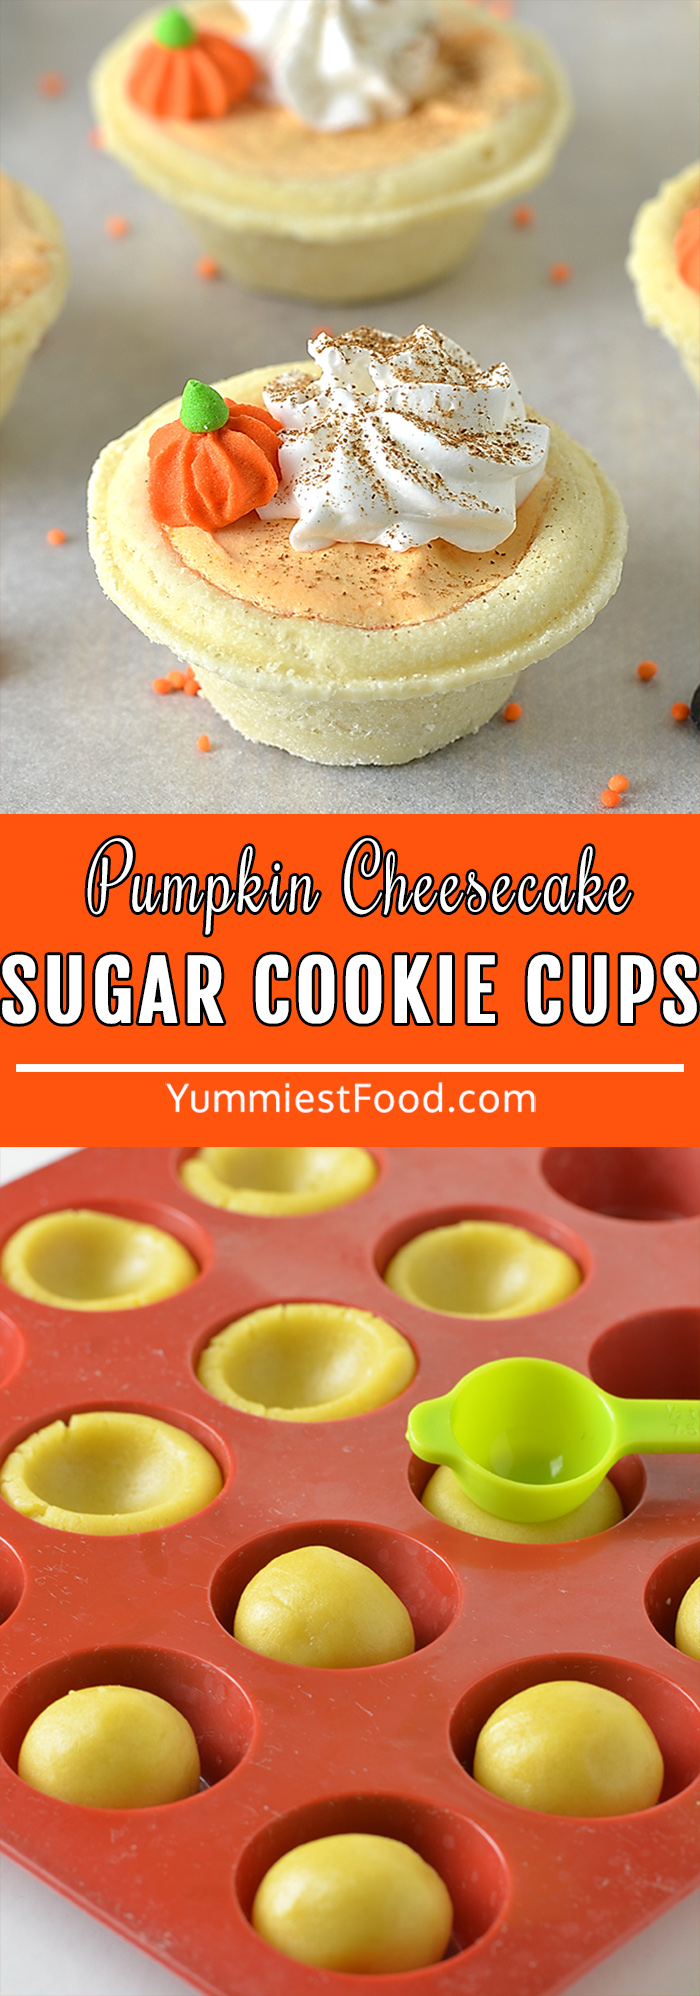 Delicious pumpkin cheesecake sugar cookie cups topped with a dollop of whipped cream and a sprinkle of cinnamon. They are delicious and such fun little cookies to bite into!